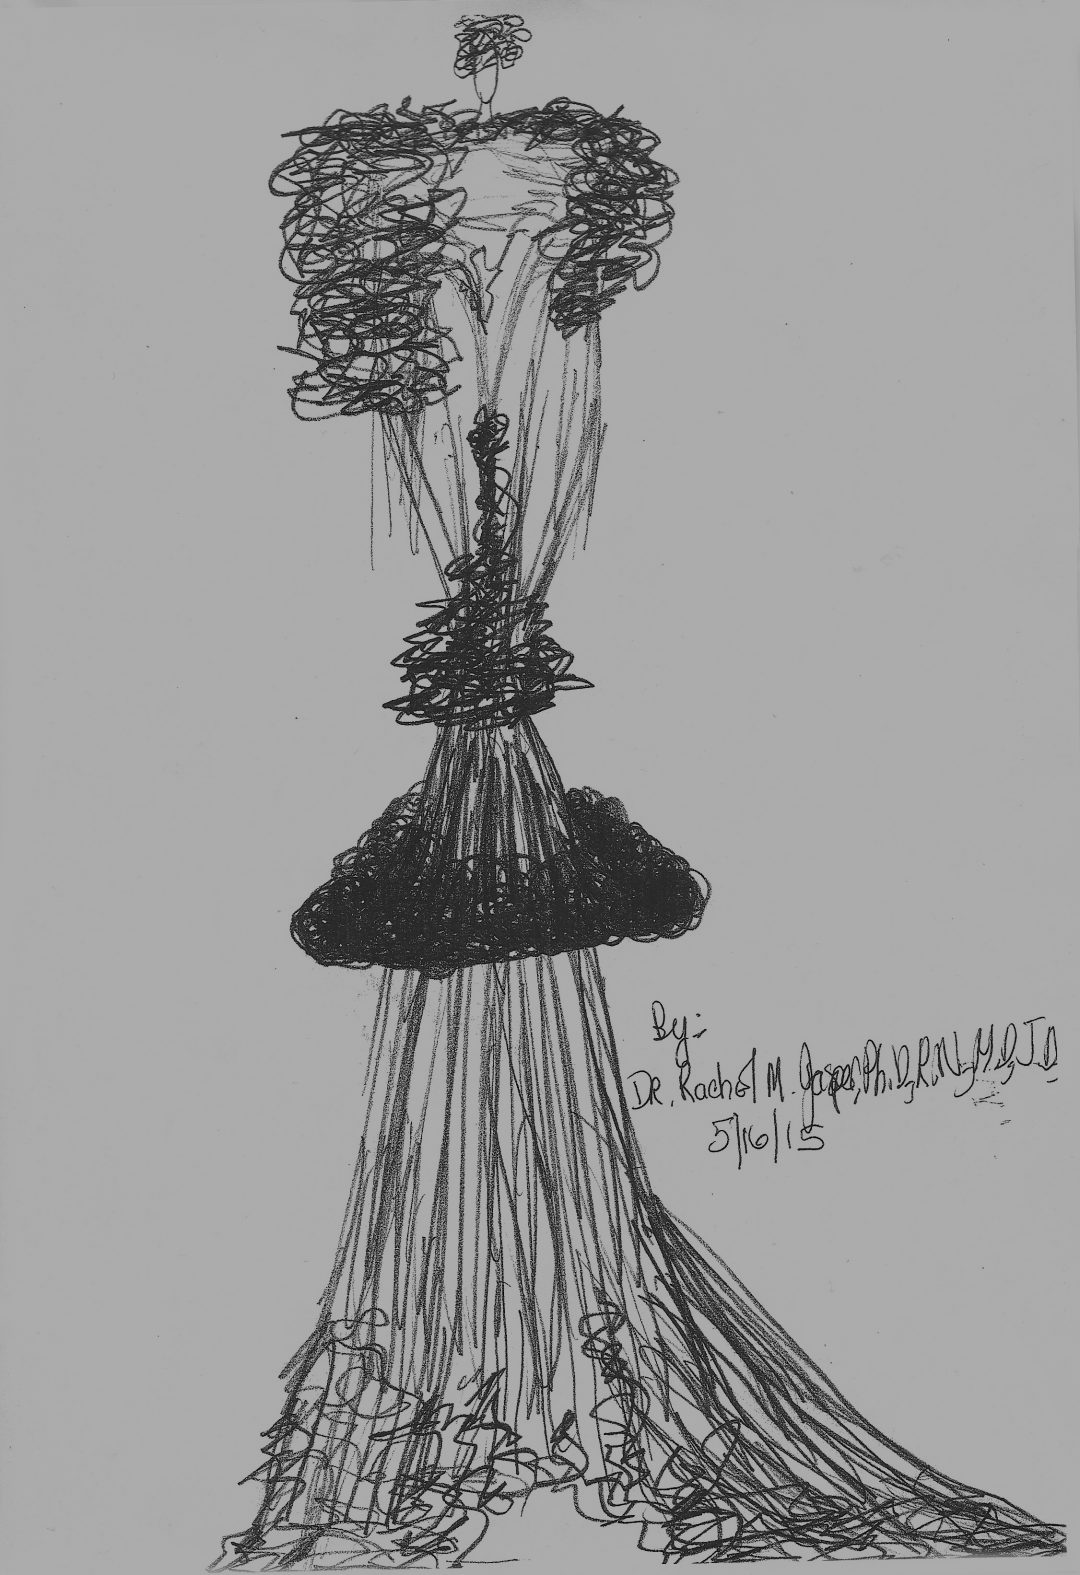 Dr. Rachel M. Jasper   “The Event of Beautiful Dresses of Love Saturn Glow Galaxy Collection of Evening Wear ”  sketched designs